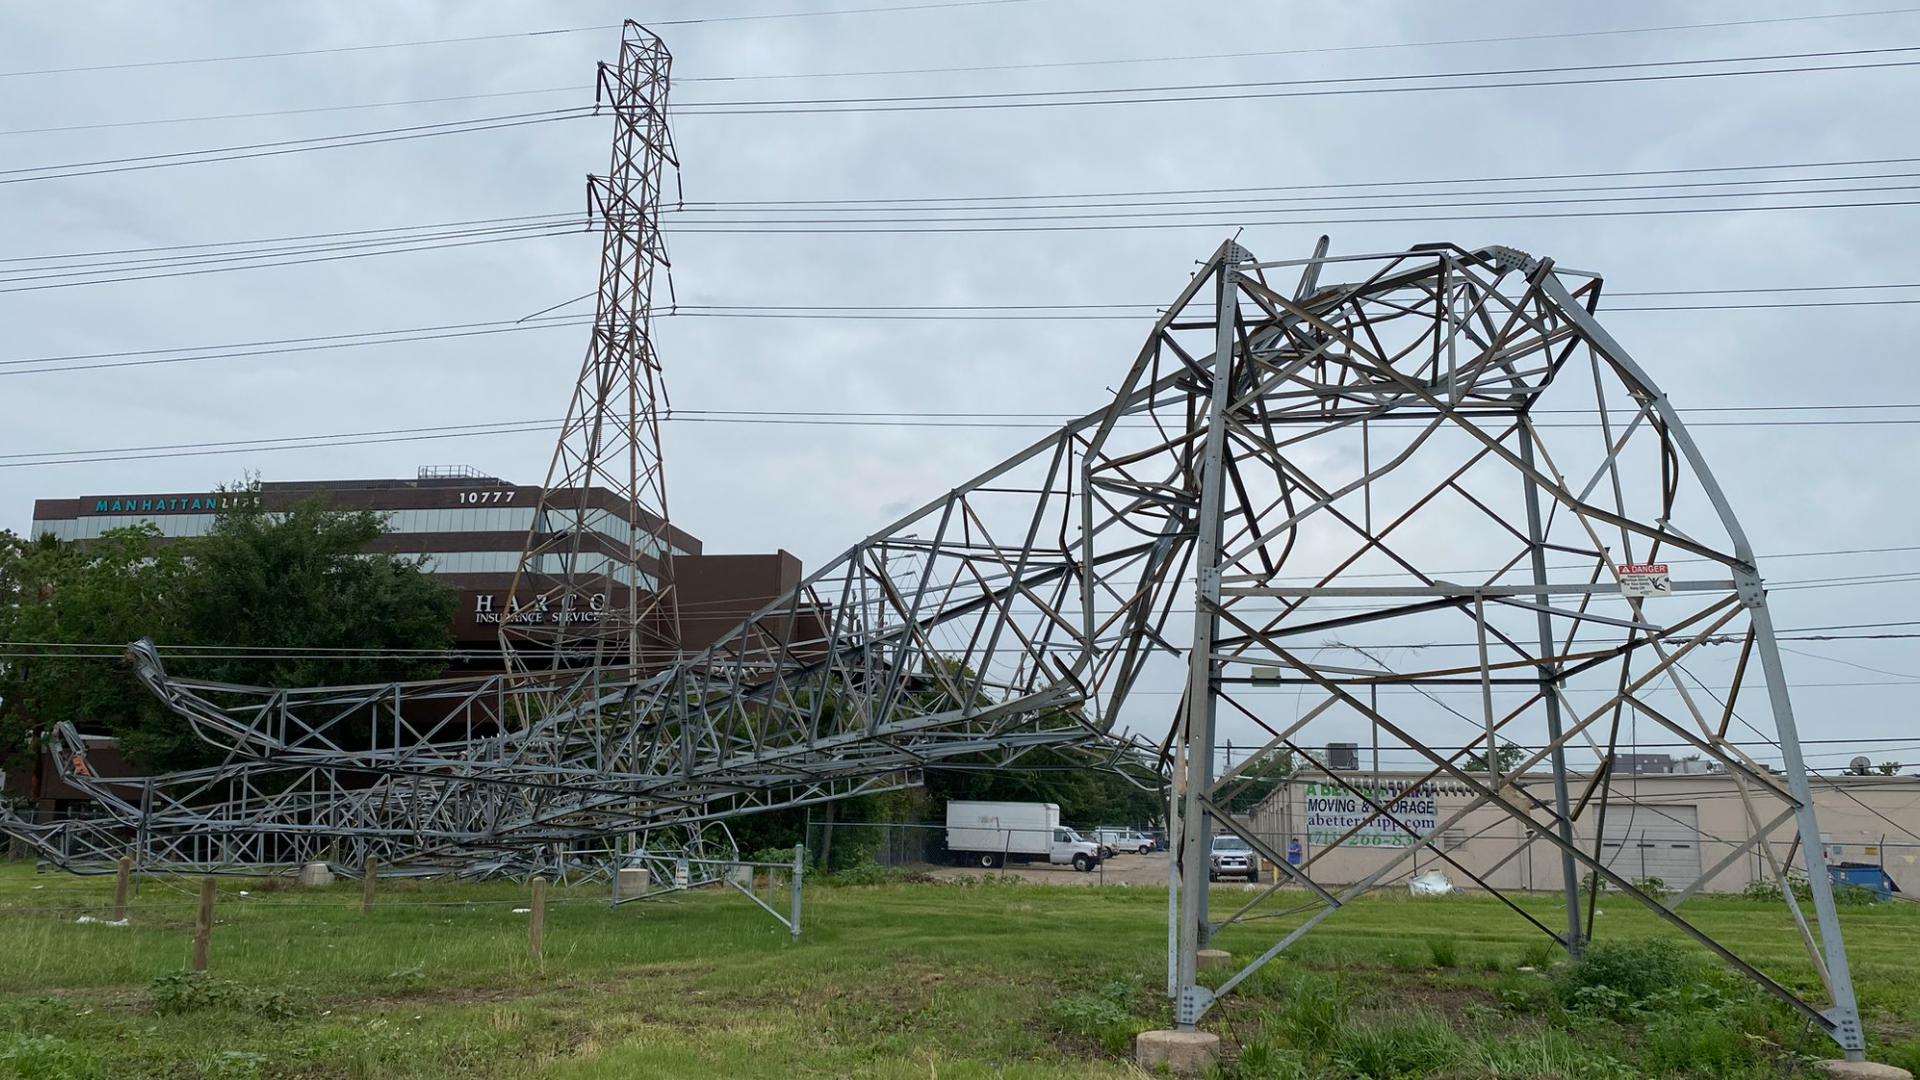 Restoration may take longer for those directly tied to damaged transmission towers.